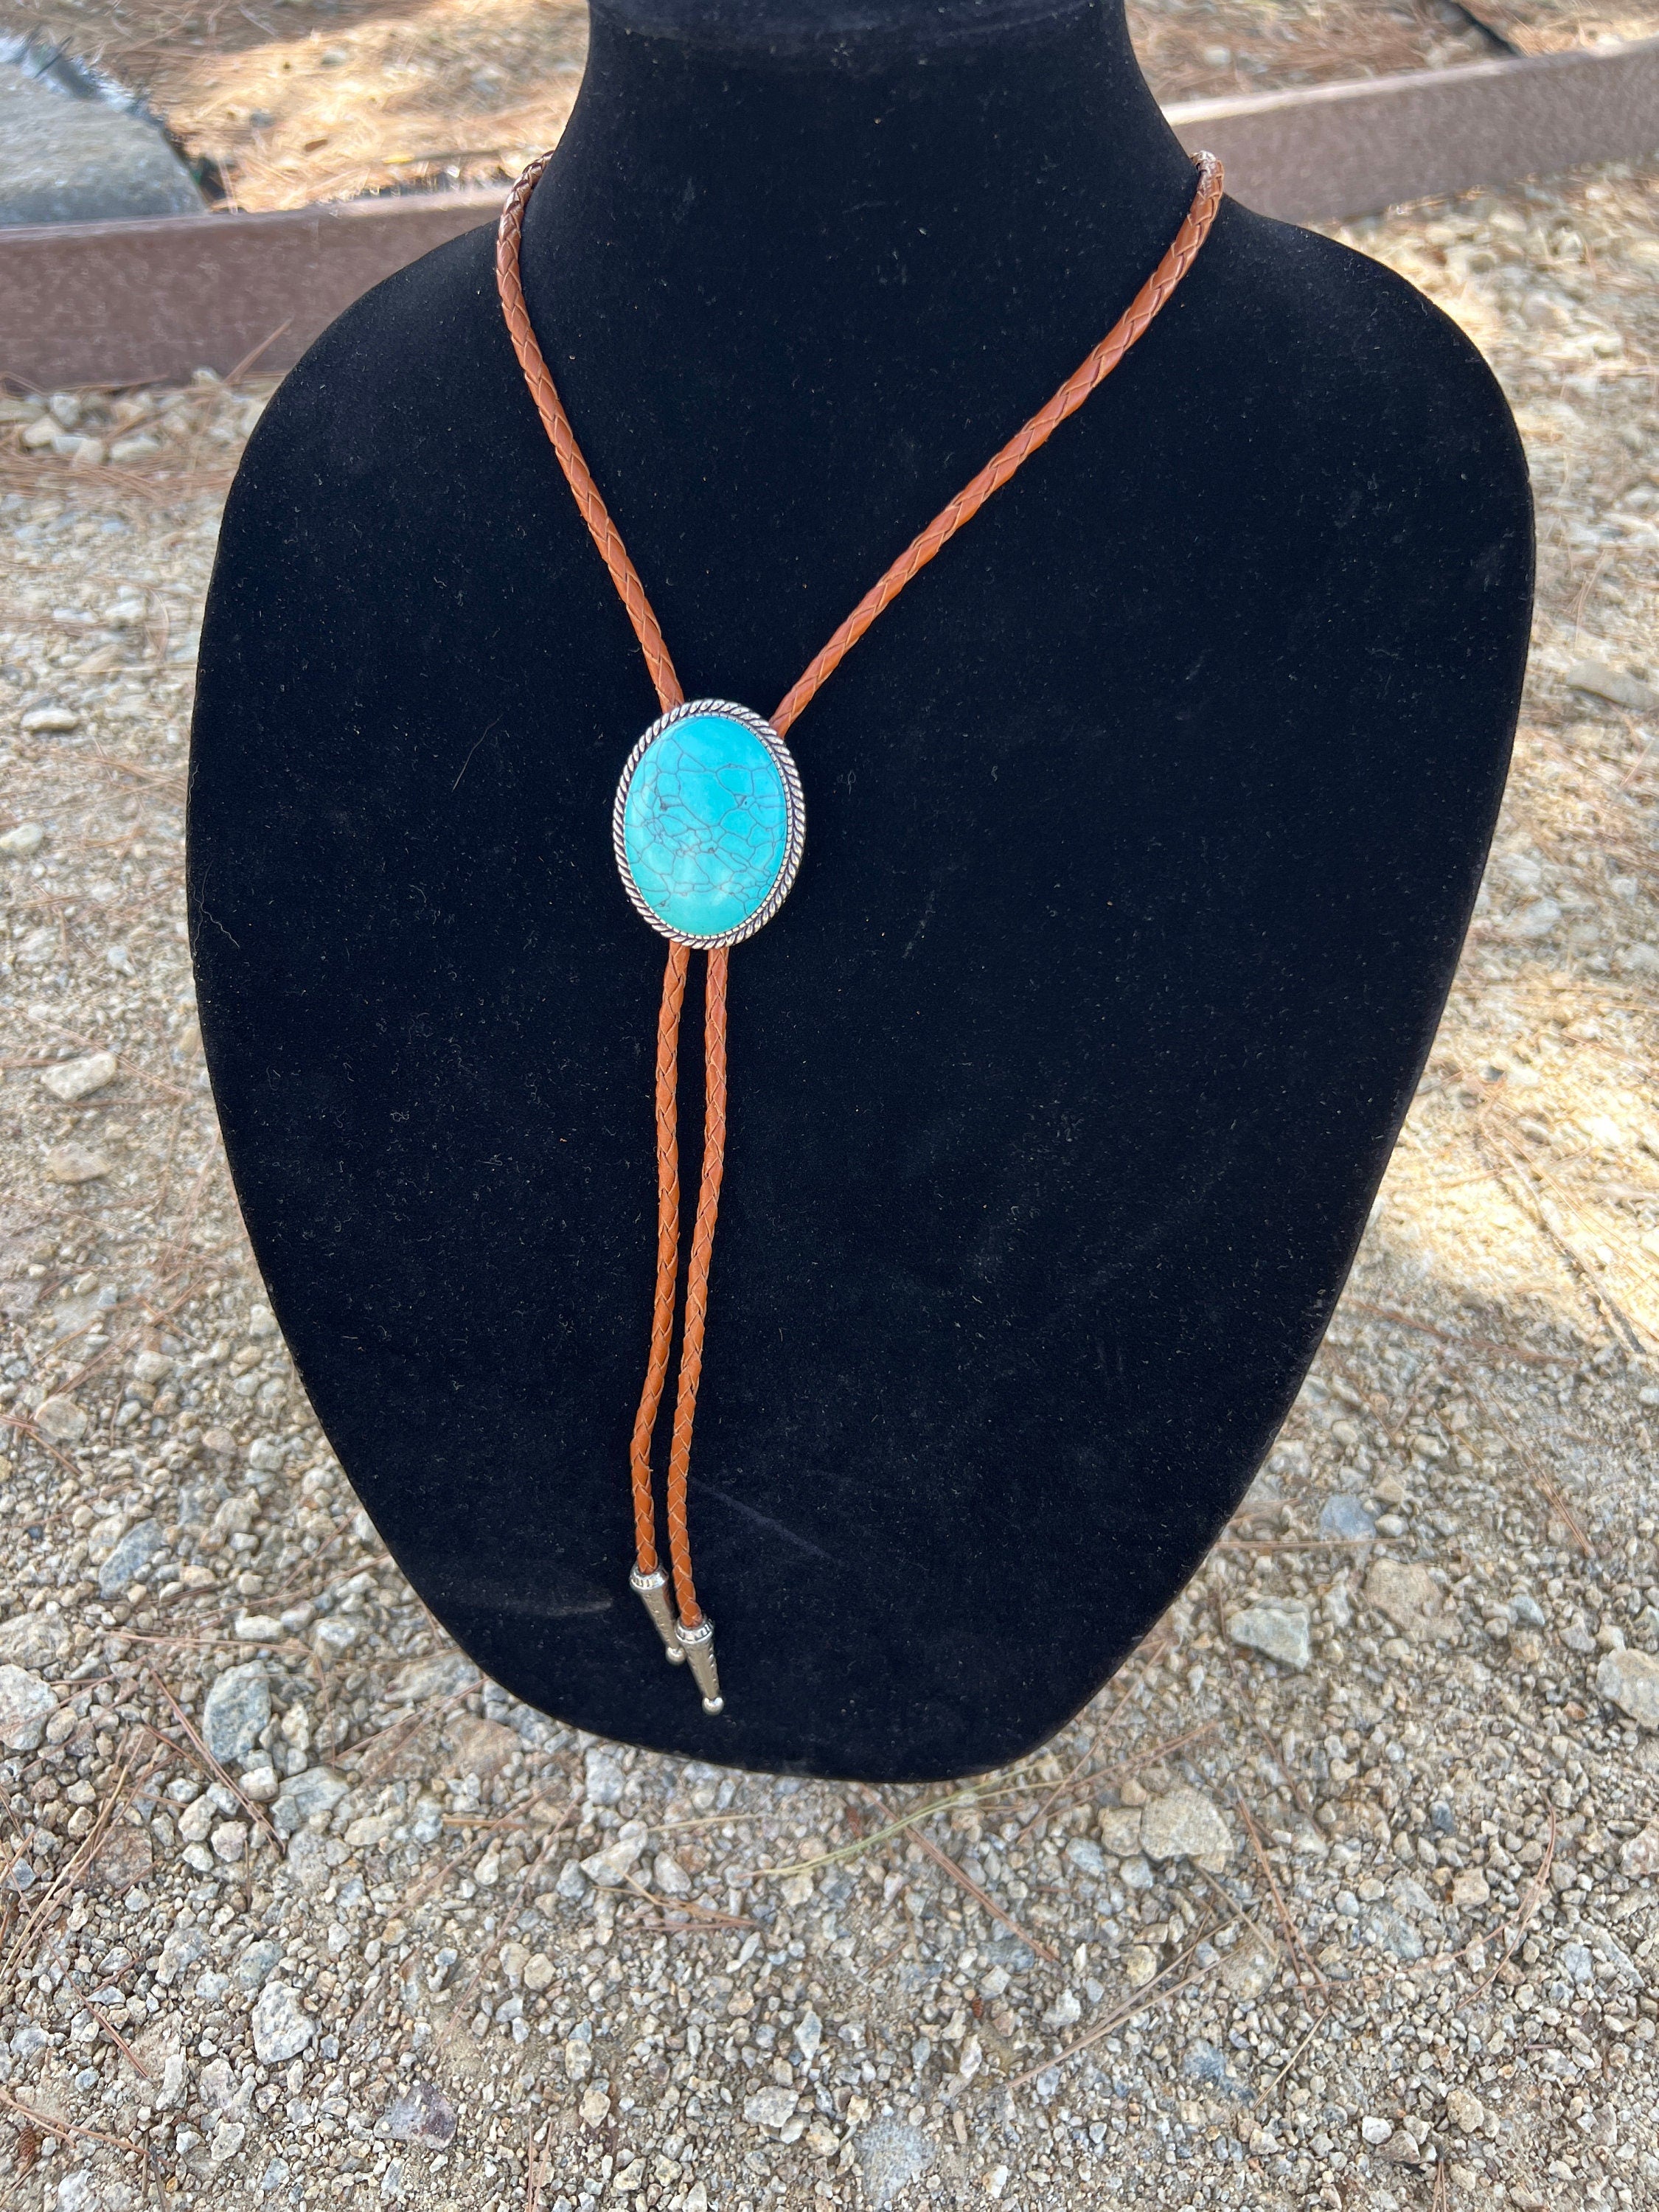 Oval Turquoise Bolo Tie